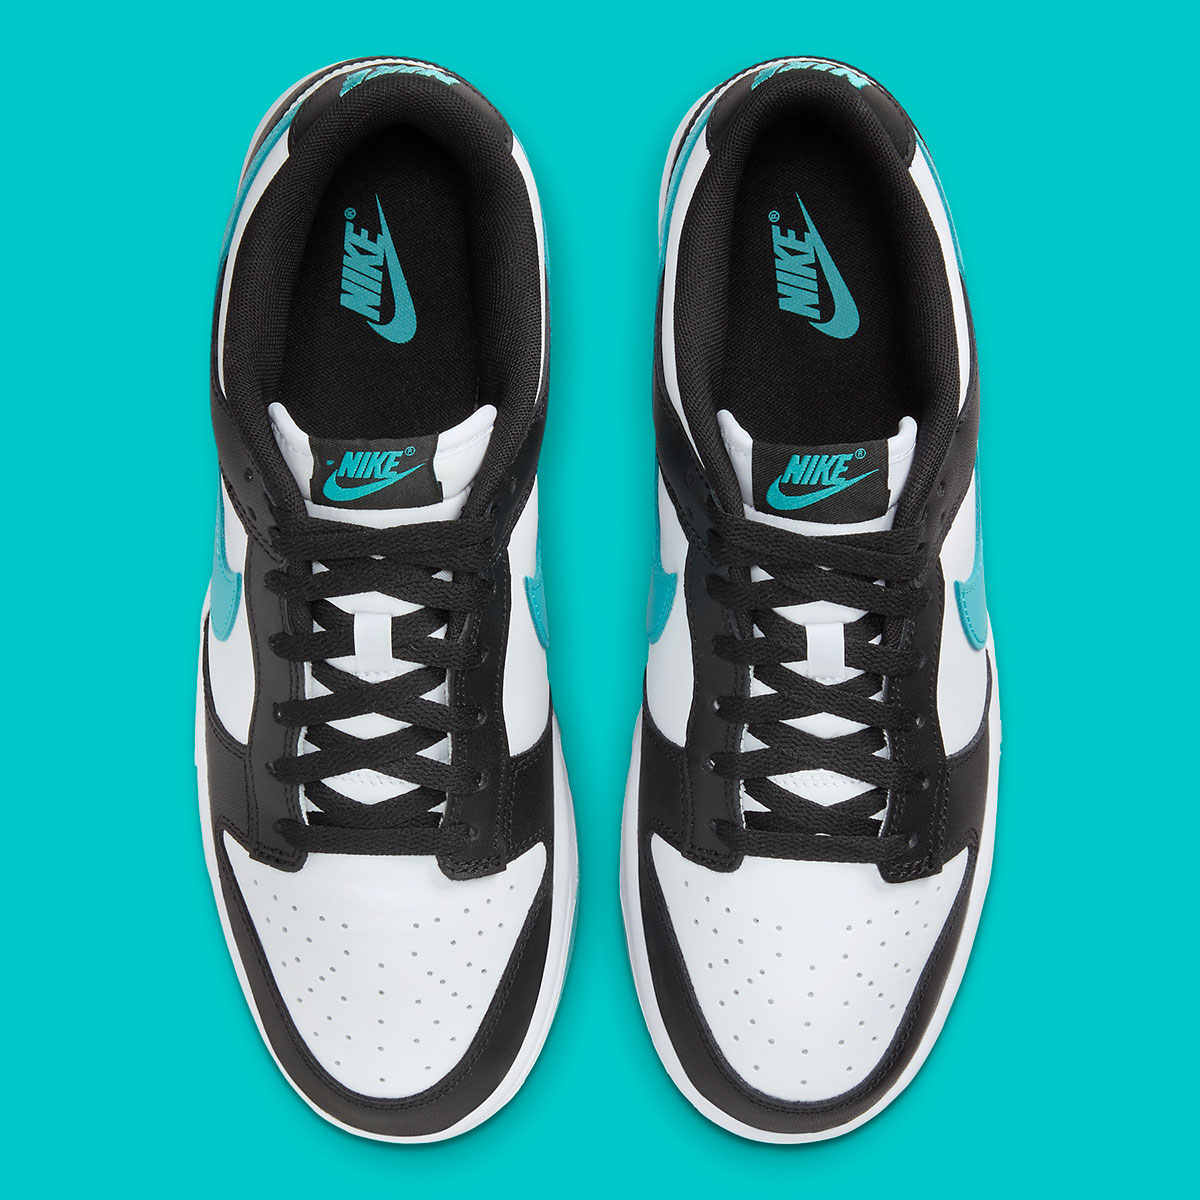 nike cheap dunk all editions shoes free youtube women Black White Dusty Cactus Dv0833 109 5